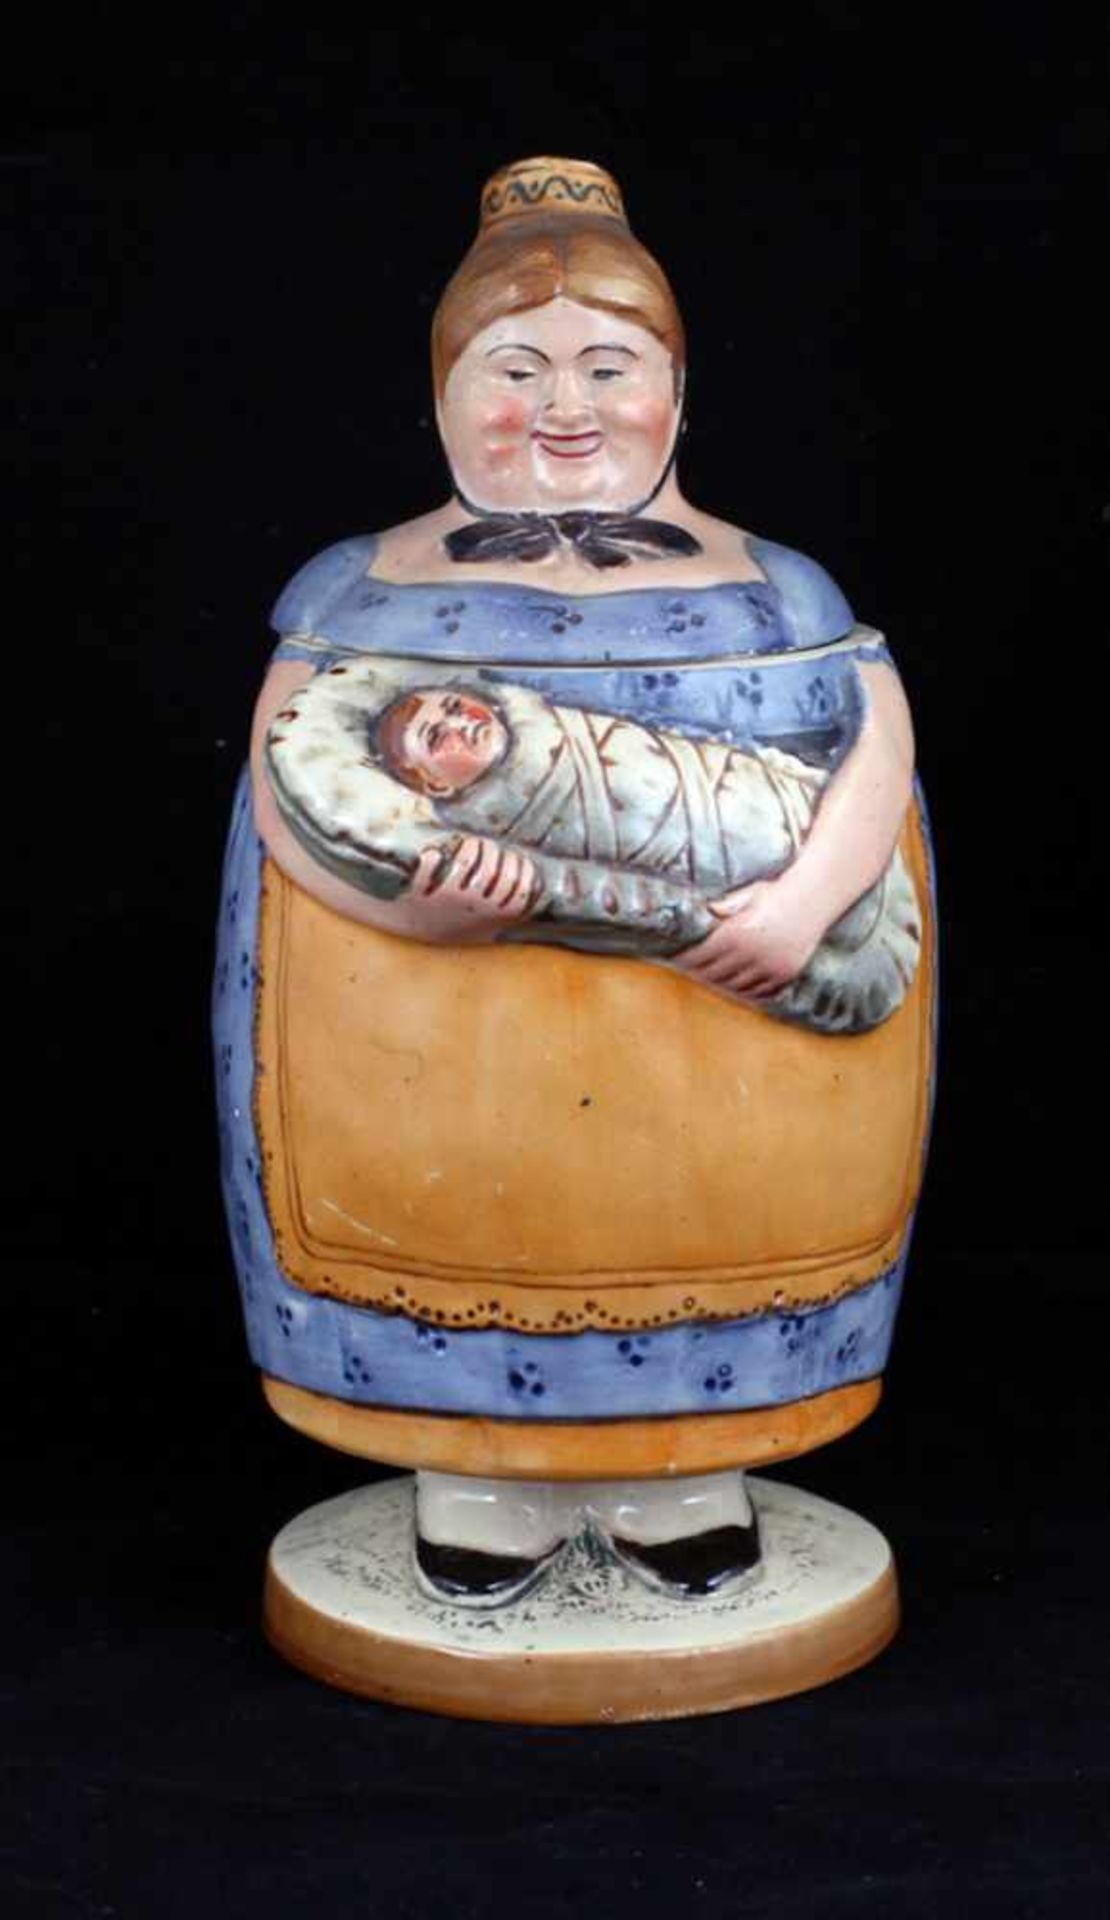 Germany. Porcelain, modeling, polychrome painting, gilding, metal fittings. Height - 21 cm, diameter